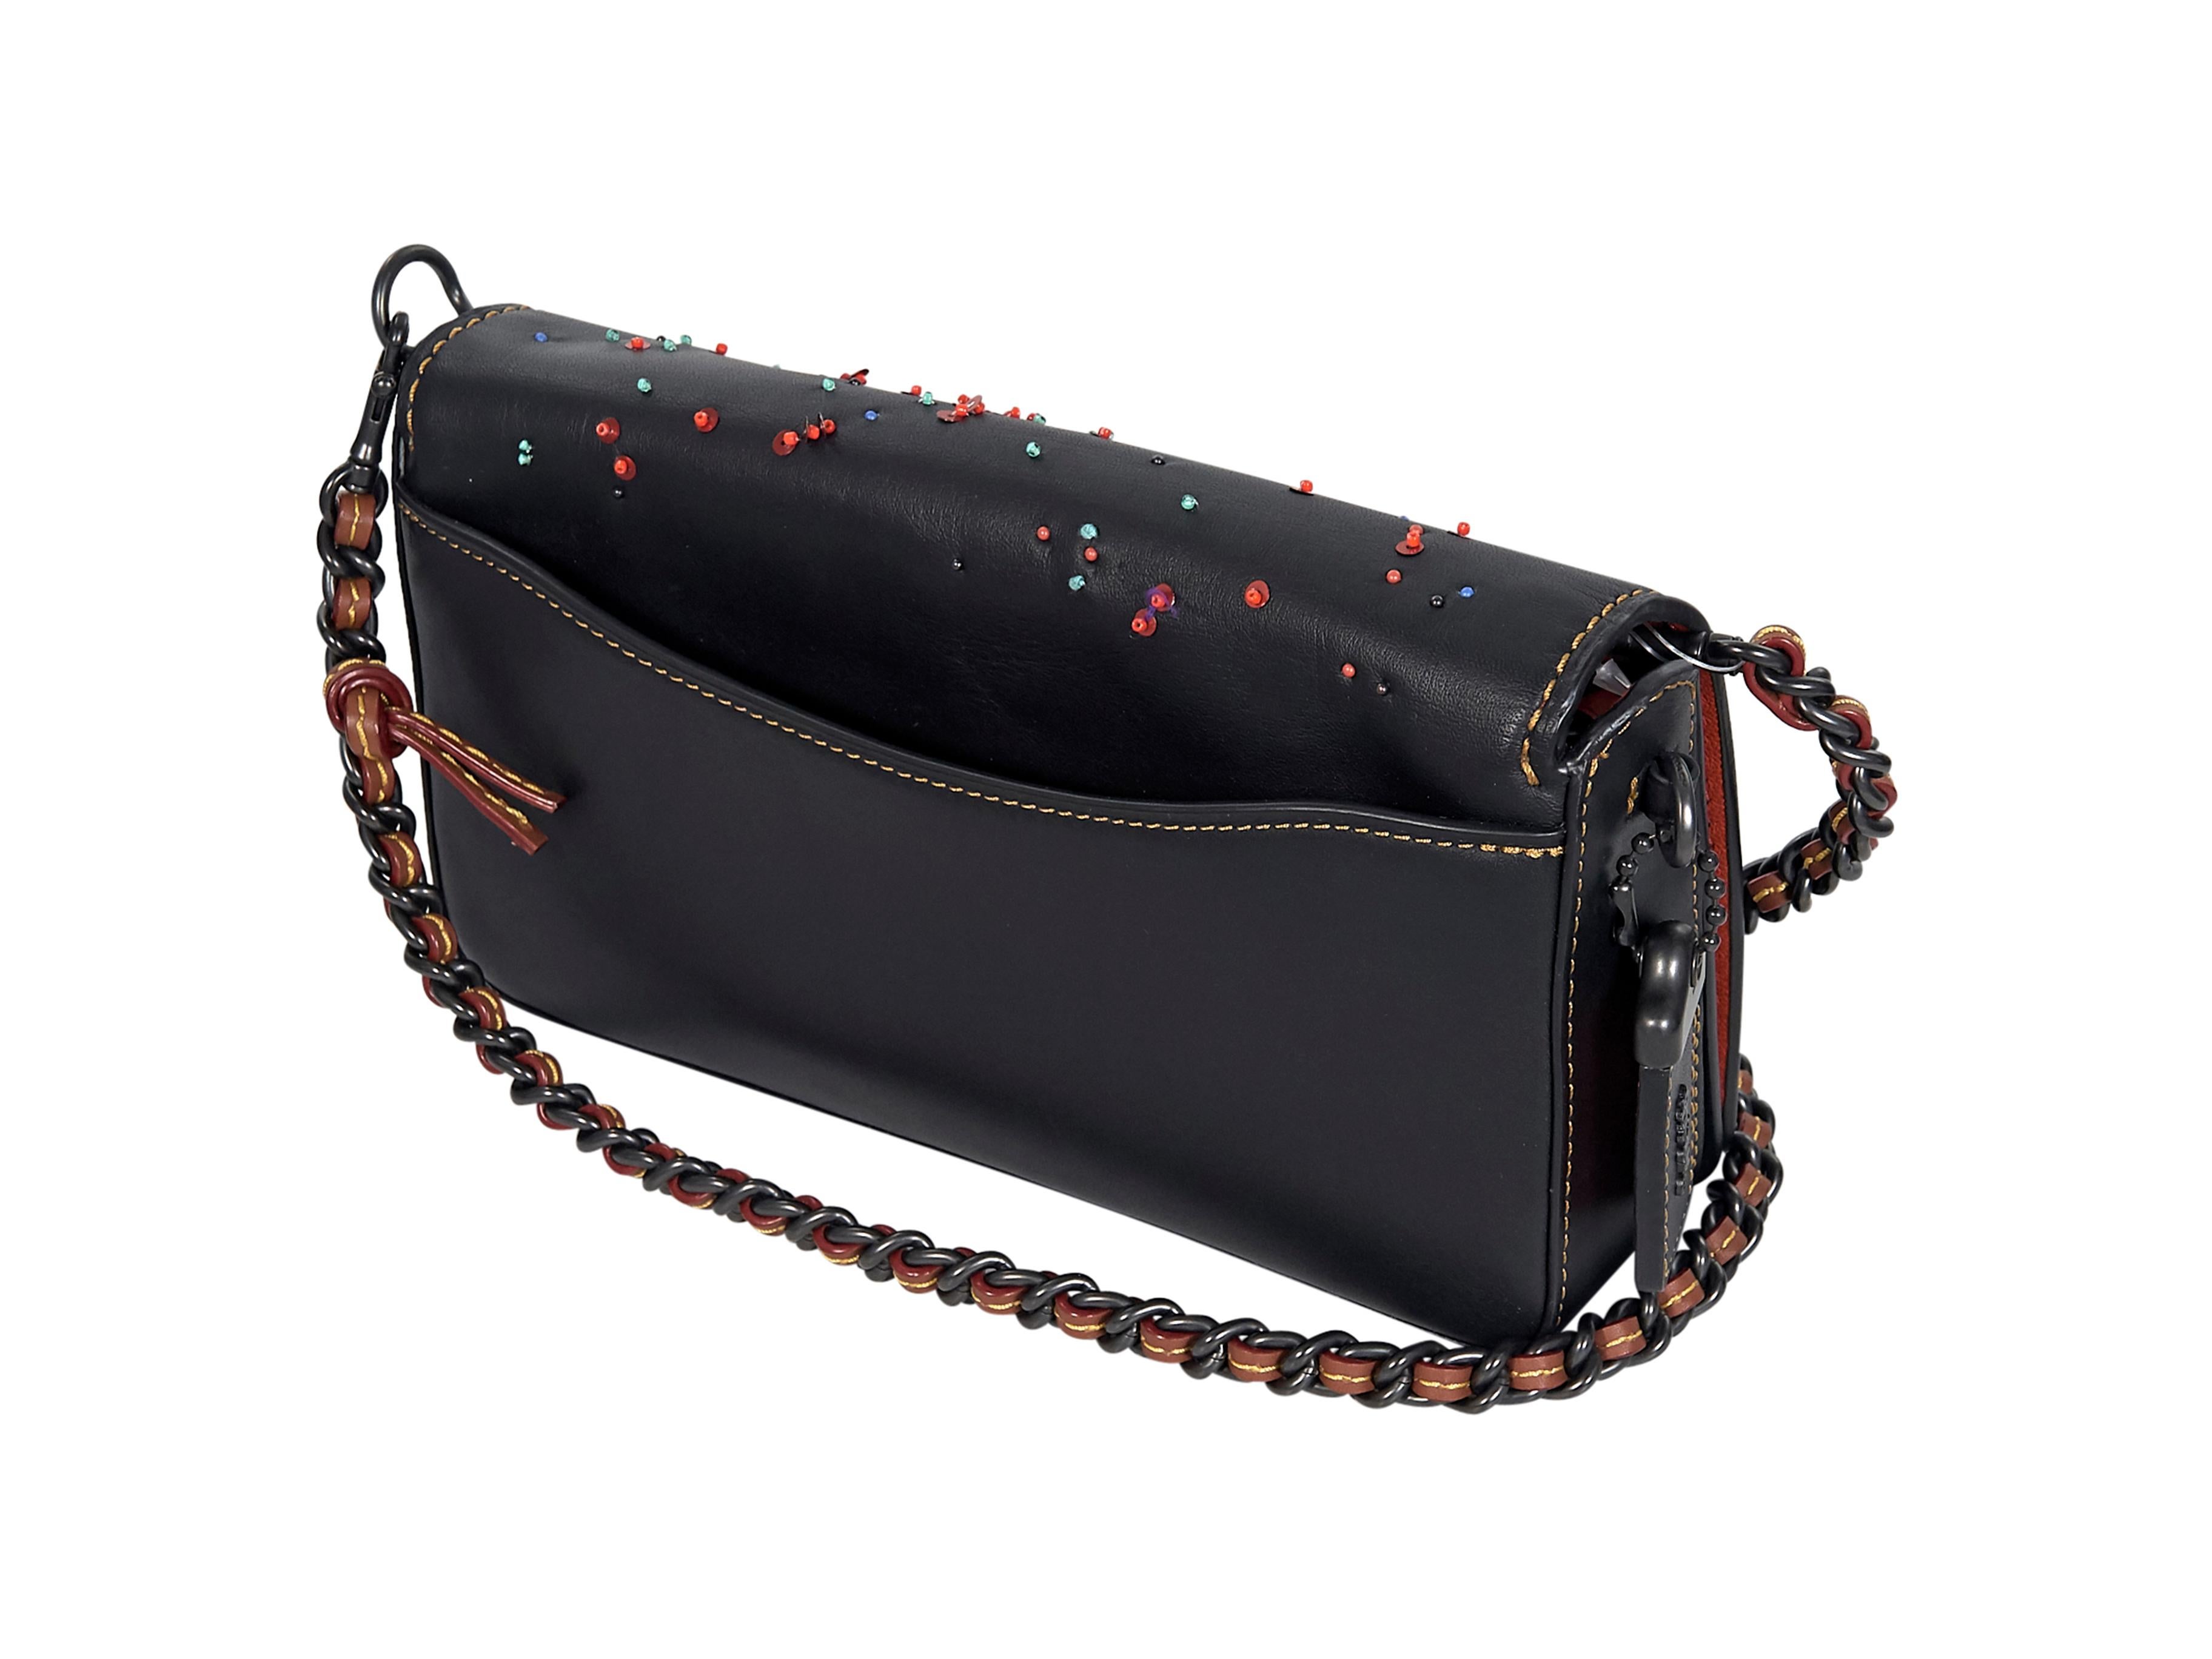 Product details:  Multicolor beaded and embroidered leather crossbody bag by Coach.  Detachable crossbody chain.  Front flap with twist-lock closure.  Leather interior with inner attached coin pouch.  Back exterior slide pocket.  Black hardware. 